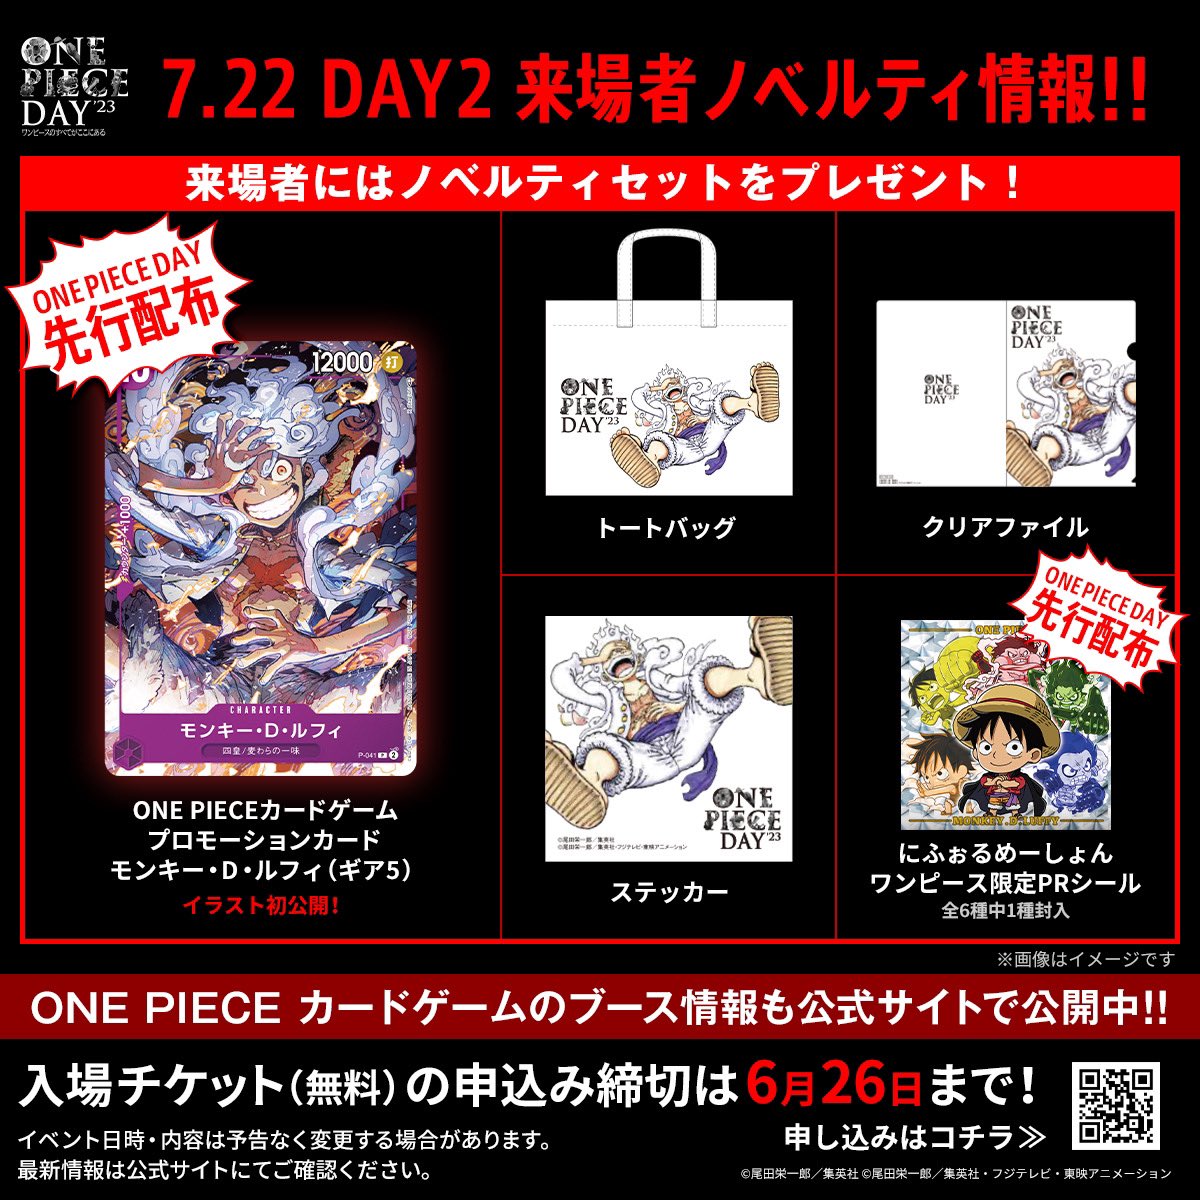 ONE PIECE DAY'23」Day2で配布予定のプロモカード「モンキー・D ...